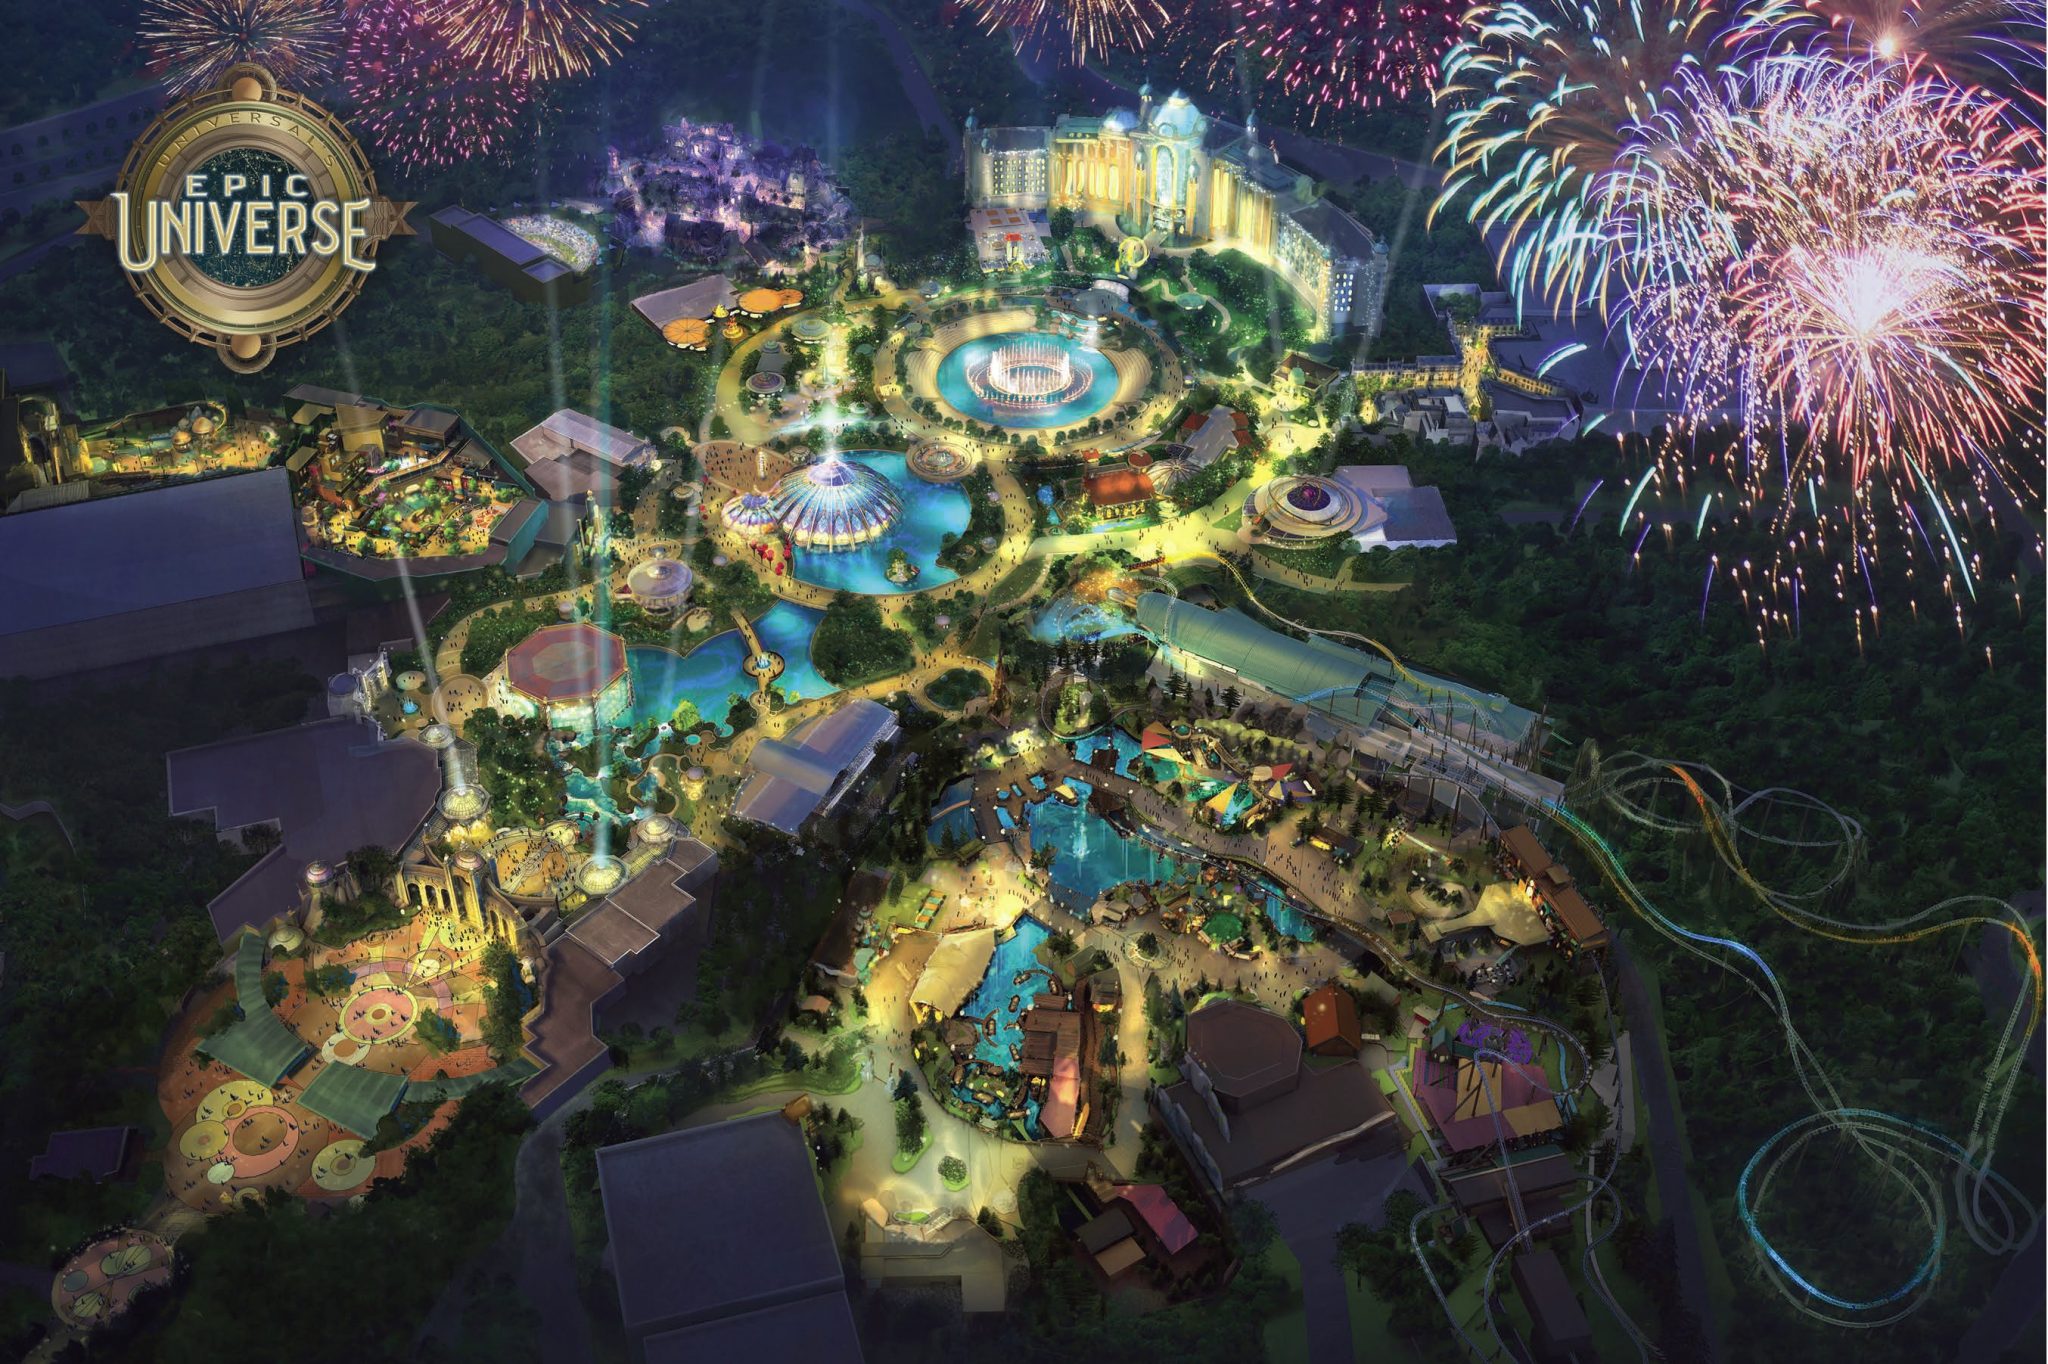 Epic Universe Update: Rumored Changes to the Wizarding World Land